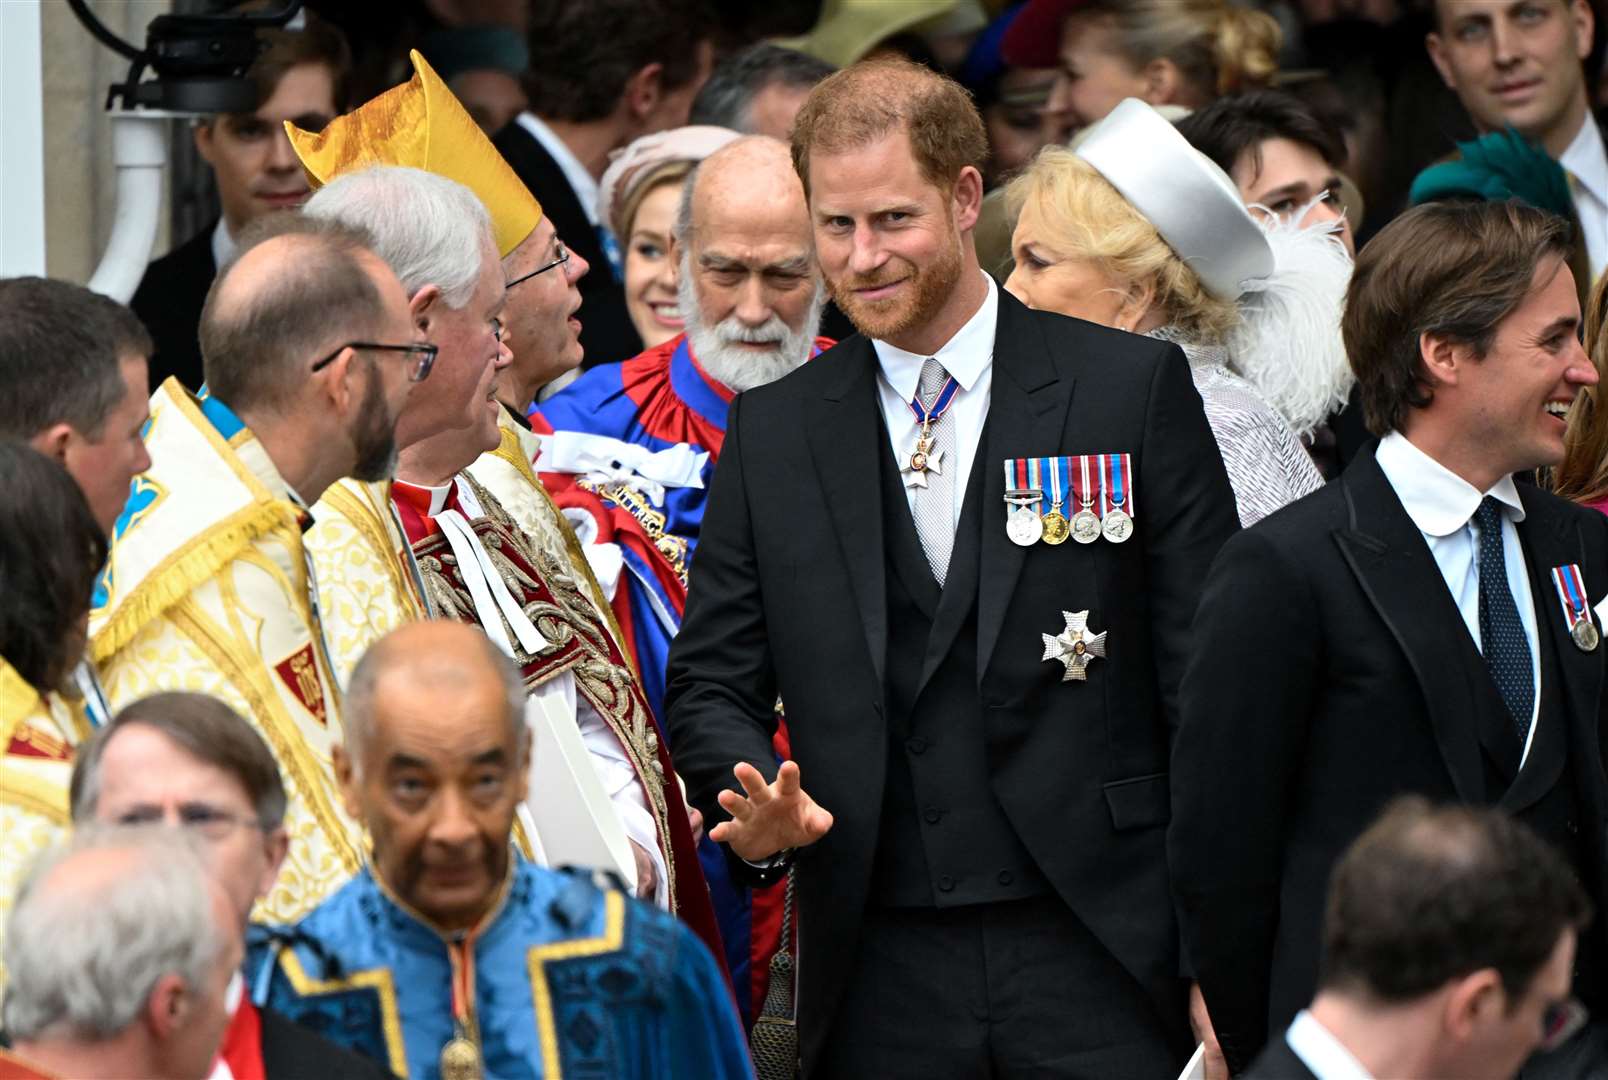 The Duke of Sussex leaves Westminster Abbey after the coronation (Toby Melville/PA)